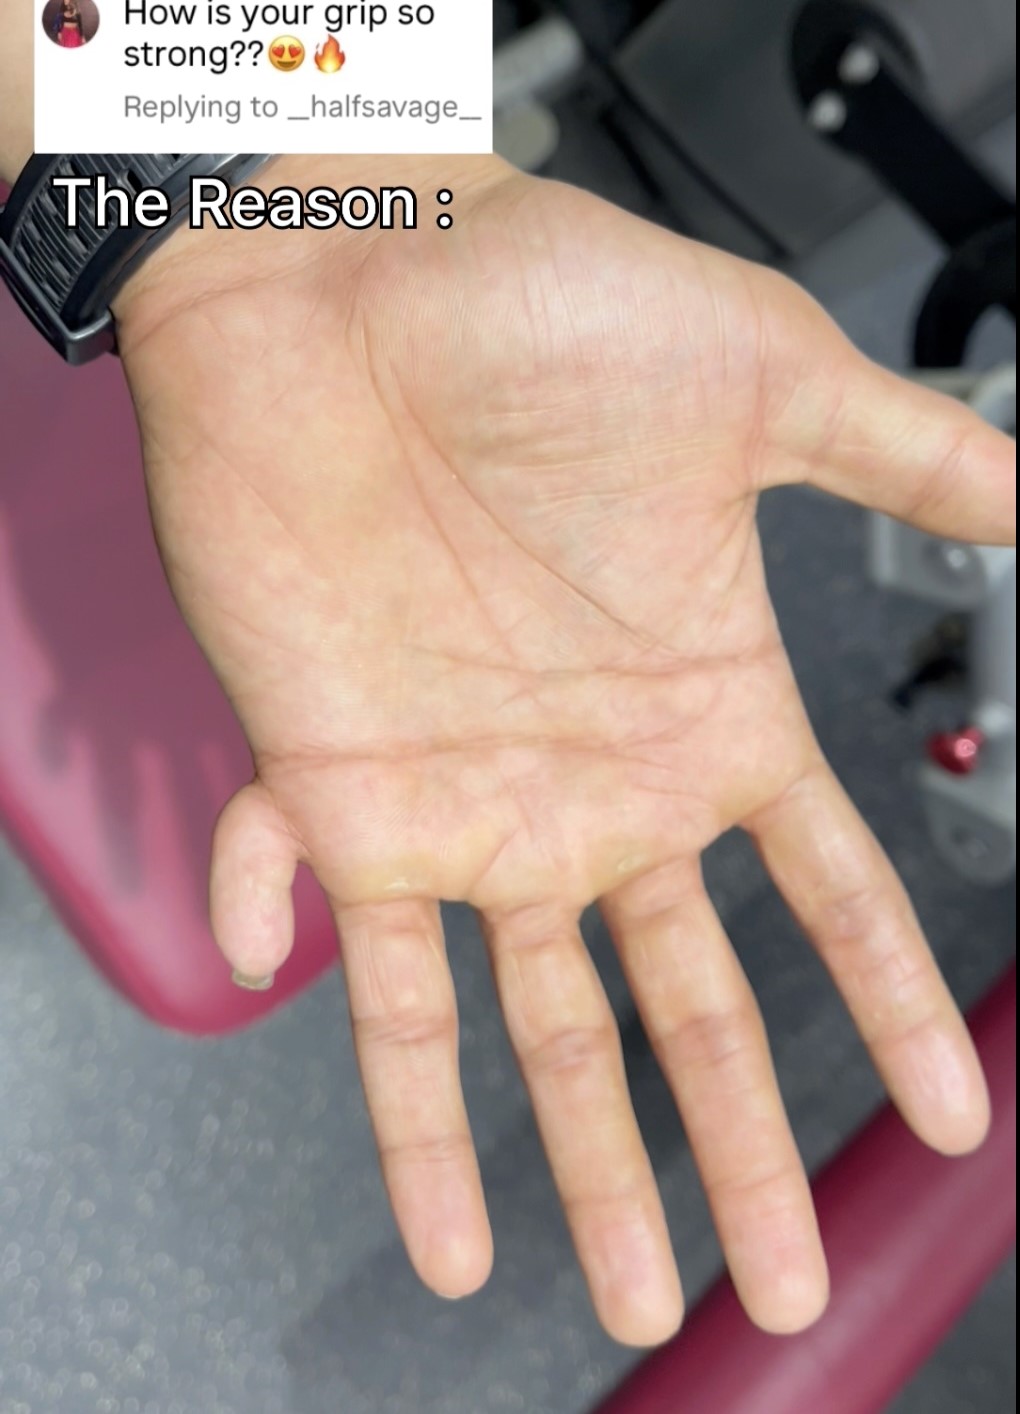 Karen Shetty, born with 12 fingers, showcases his 11th finger, a gym asset. Genetic rarity, it rotates 360°, aiding his unique grip strength.